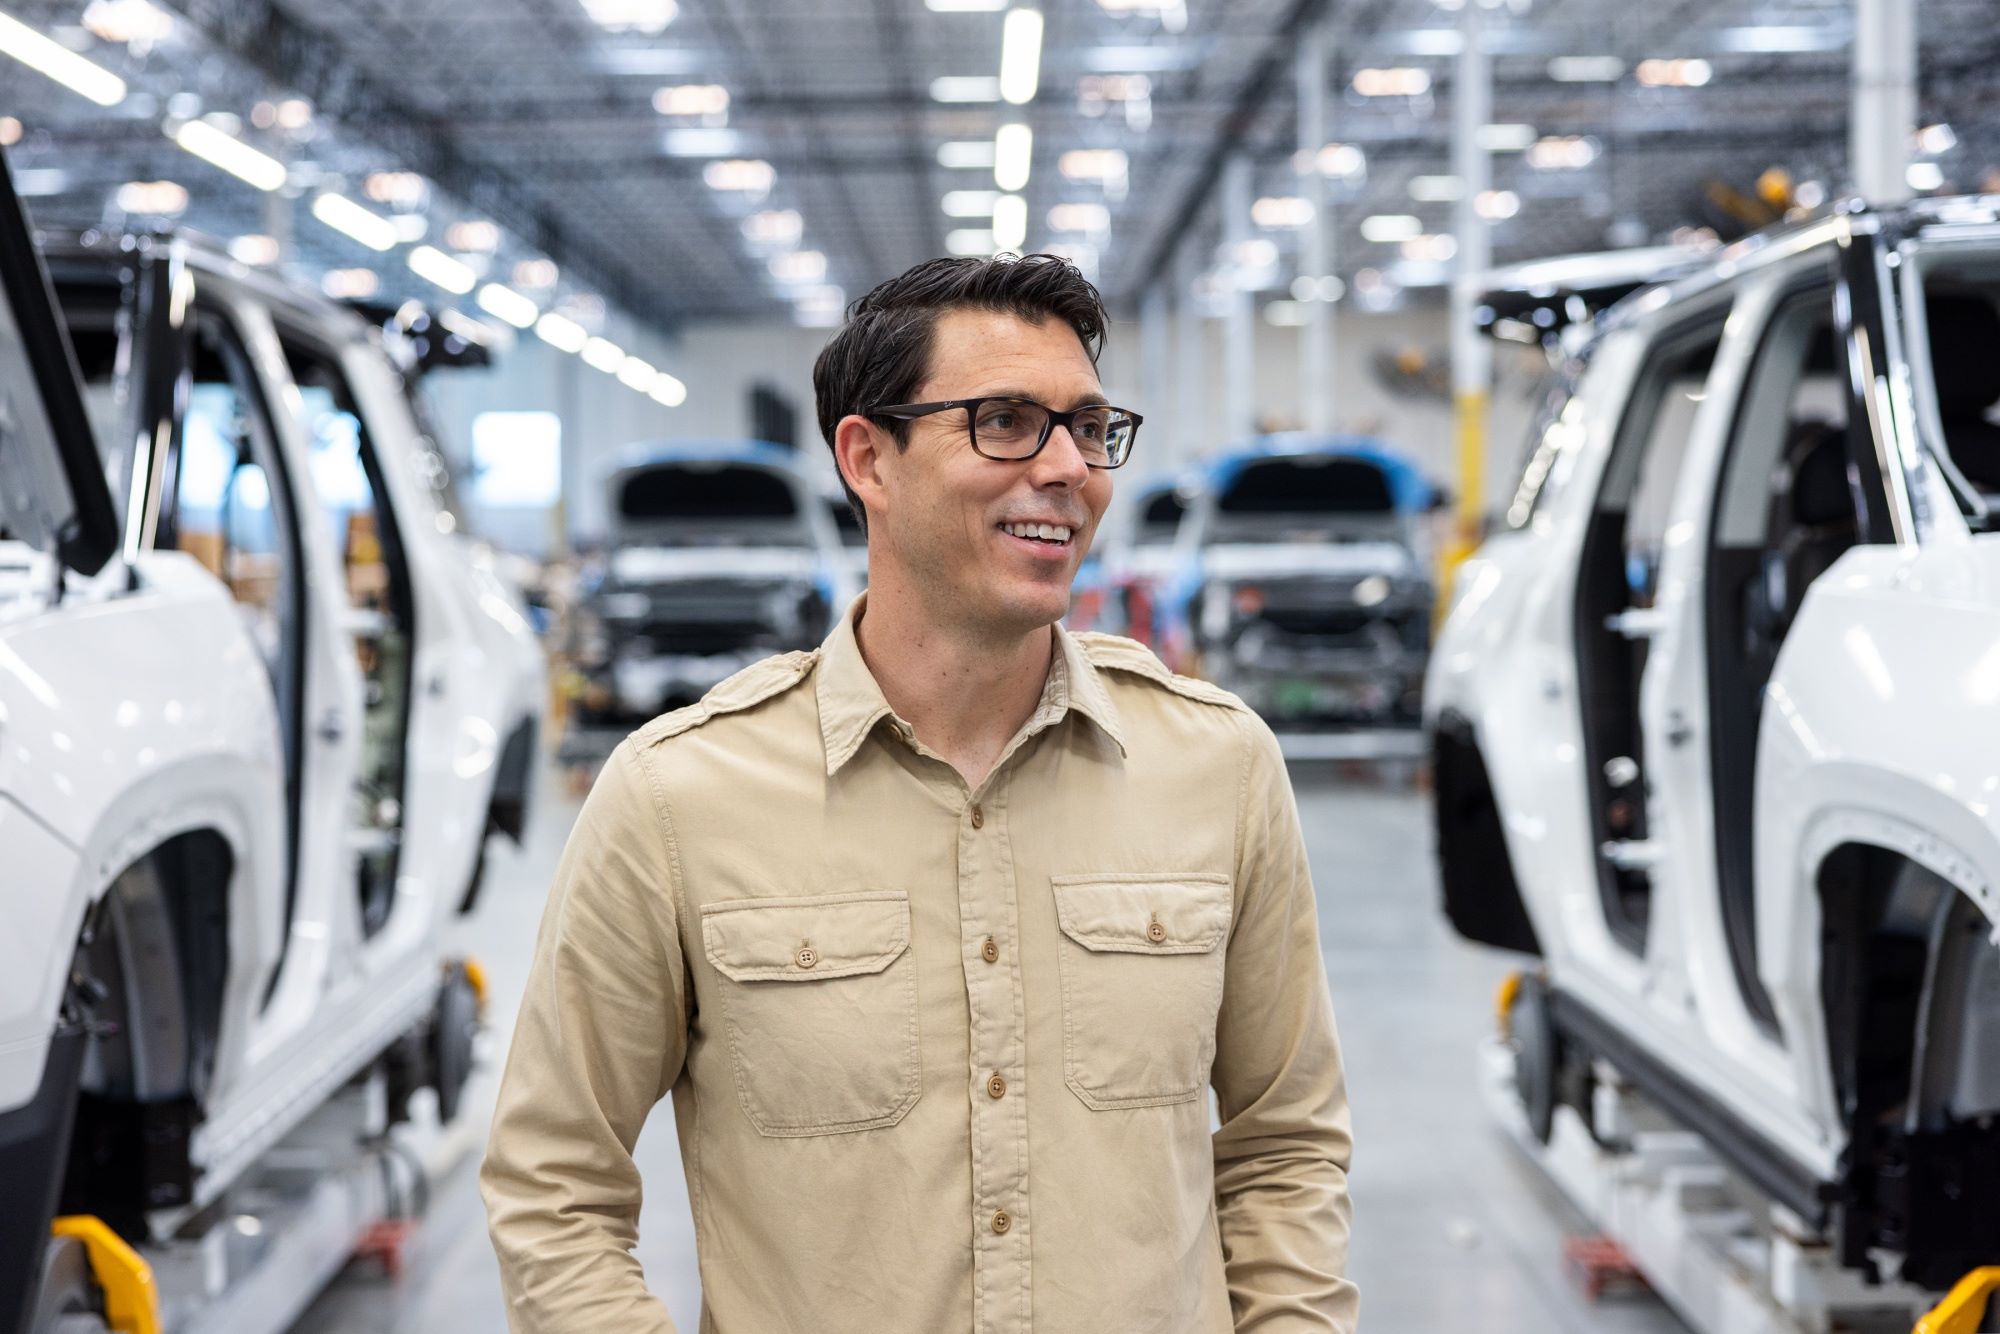 Rivian CEO RJ Scaringe Takes On Top Product Role At EV Maker